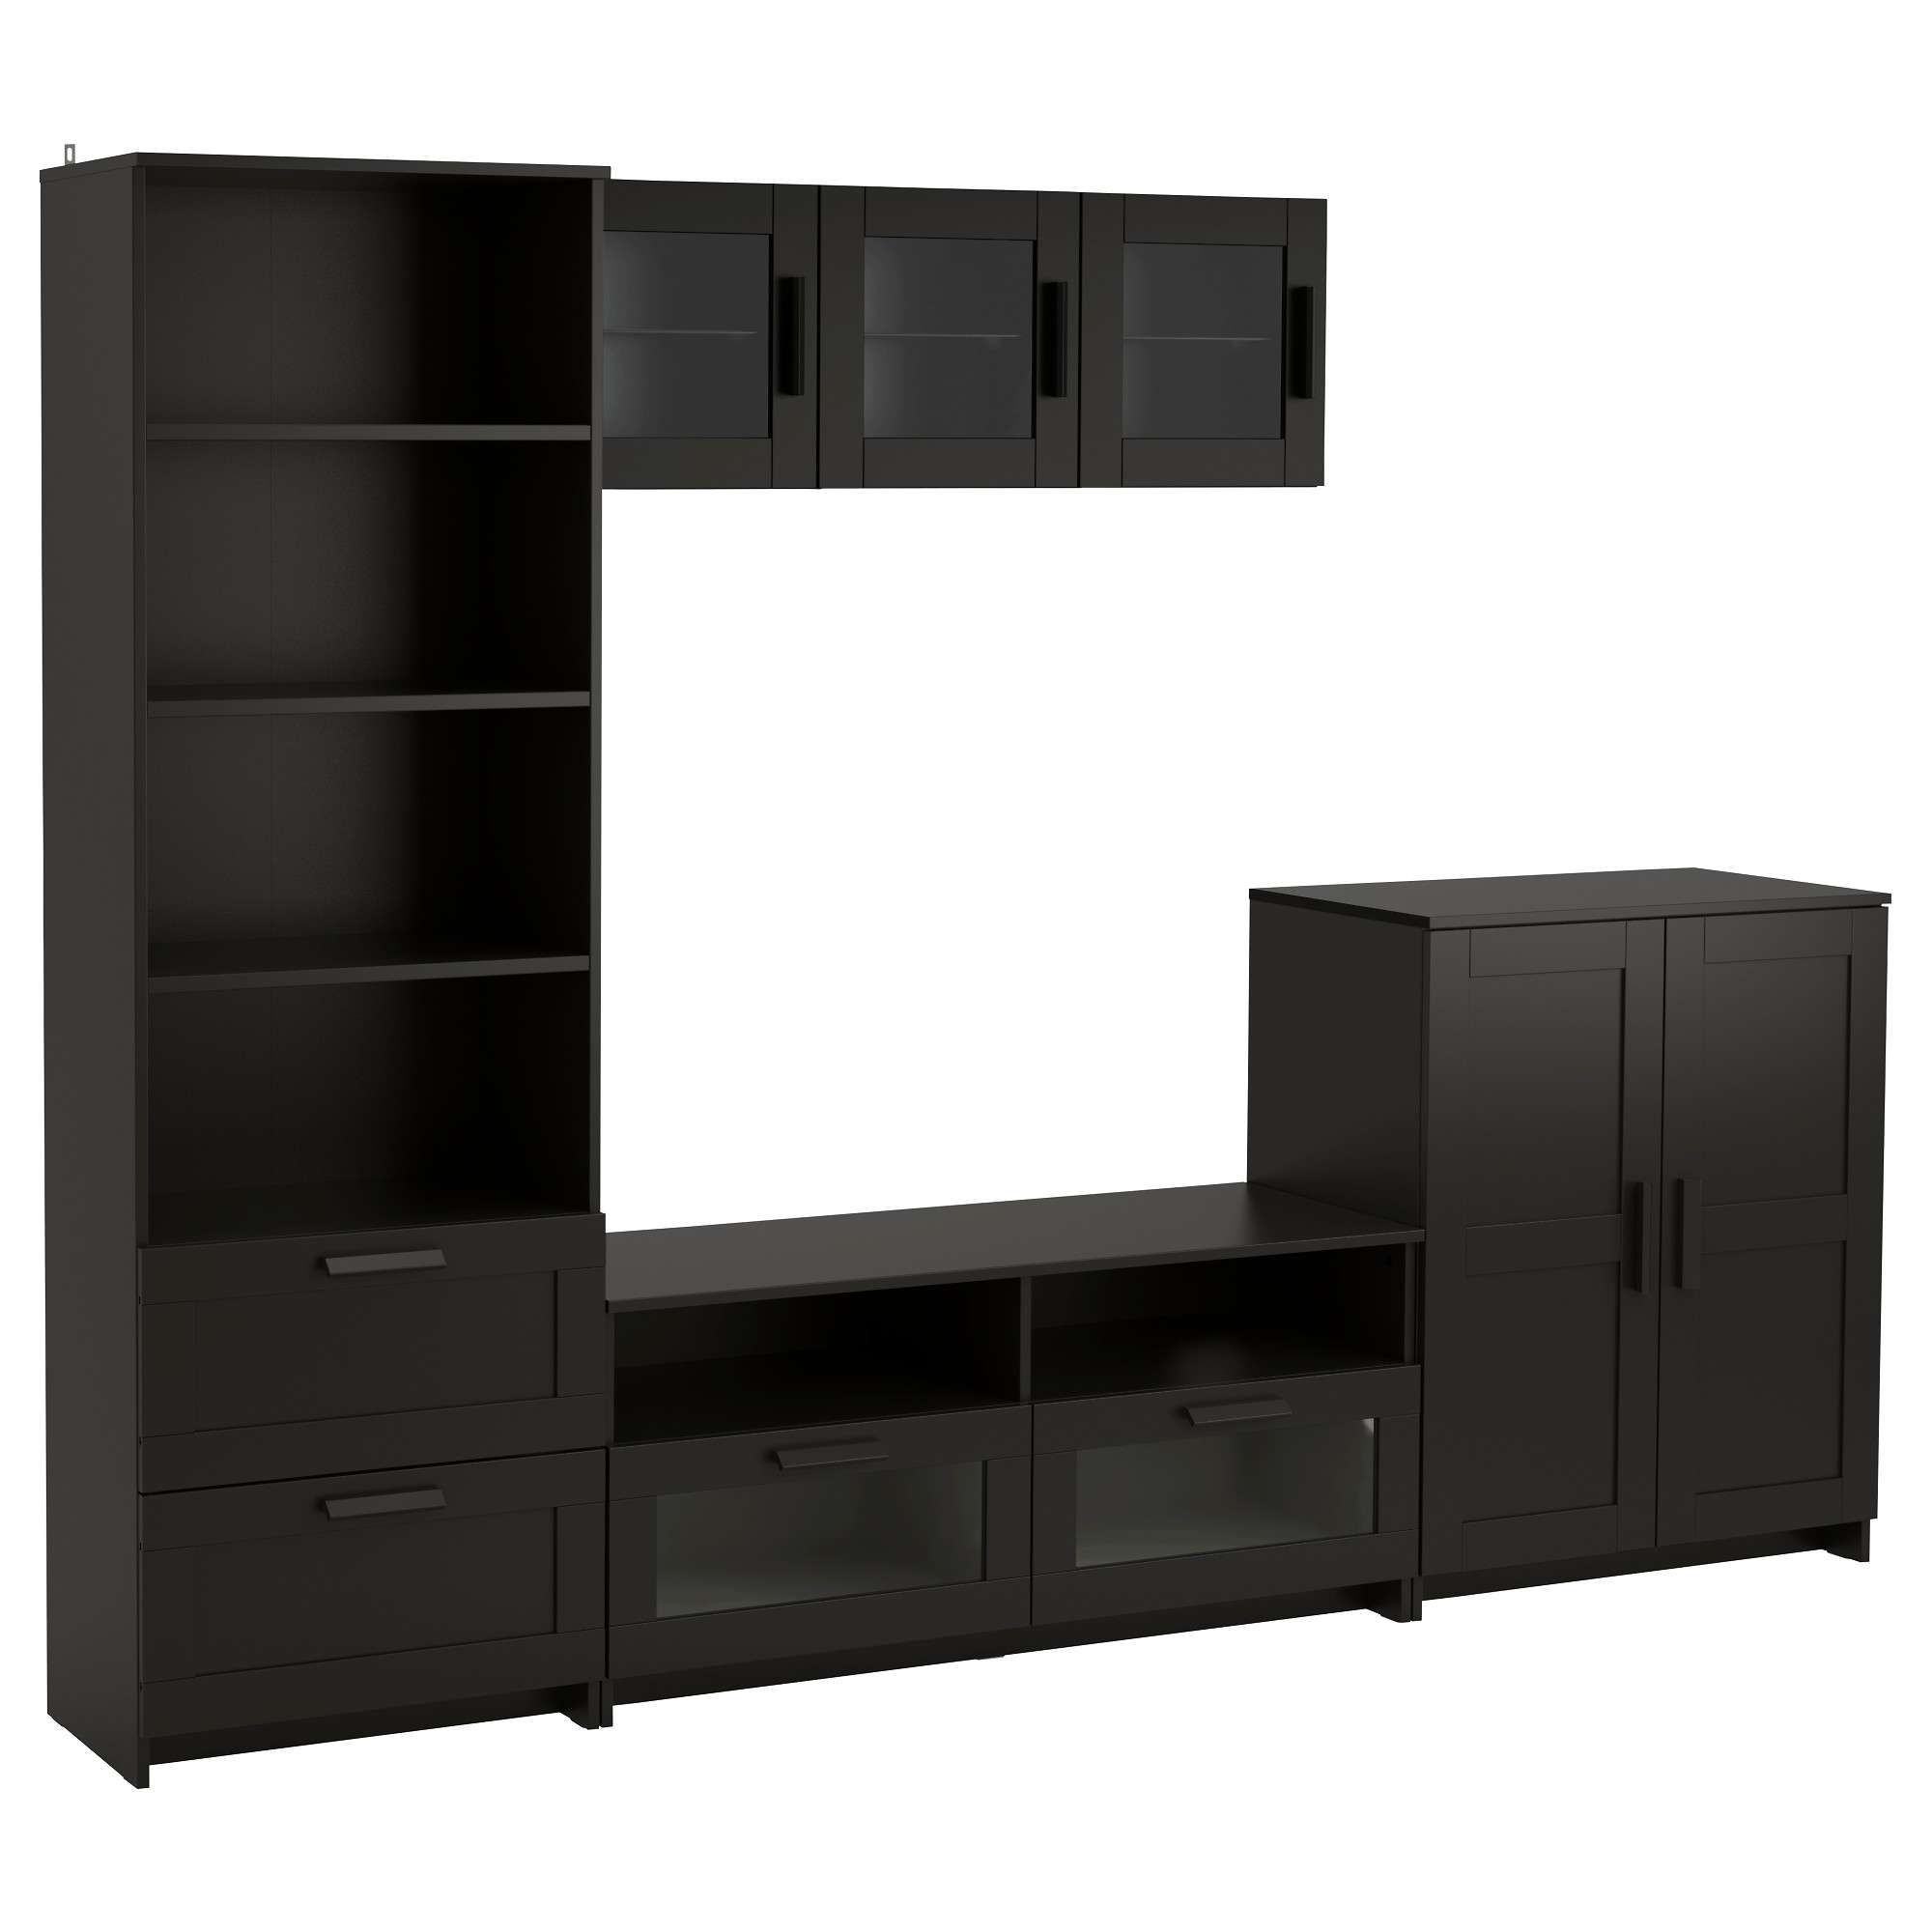 Brimnes Tv Storage Combination Black 260x41x190 Cm – Ikea In Tv Cabinets And Bookcase (View 11 of 20)